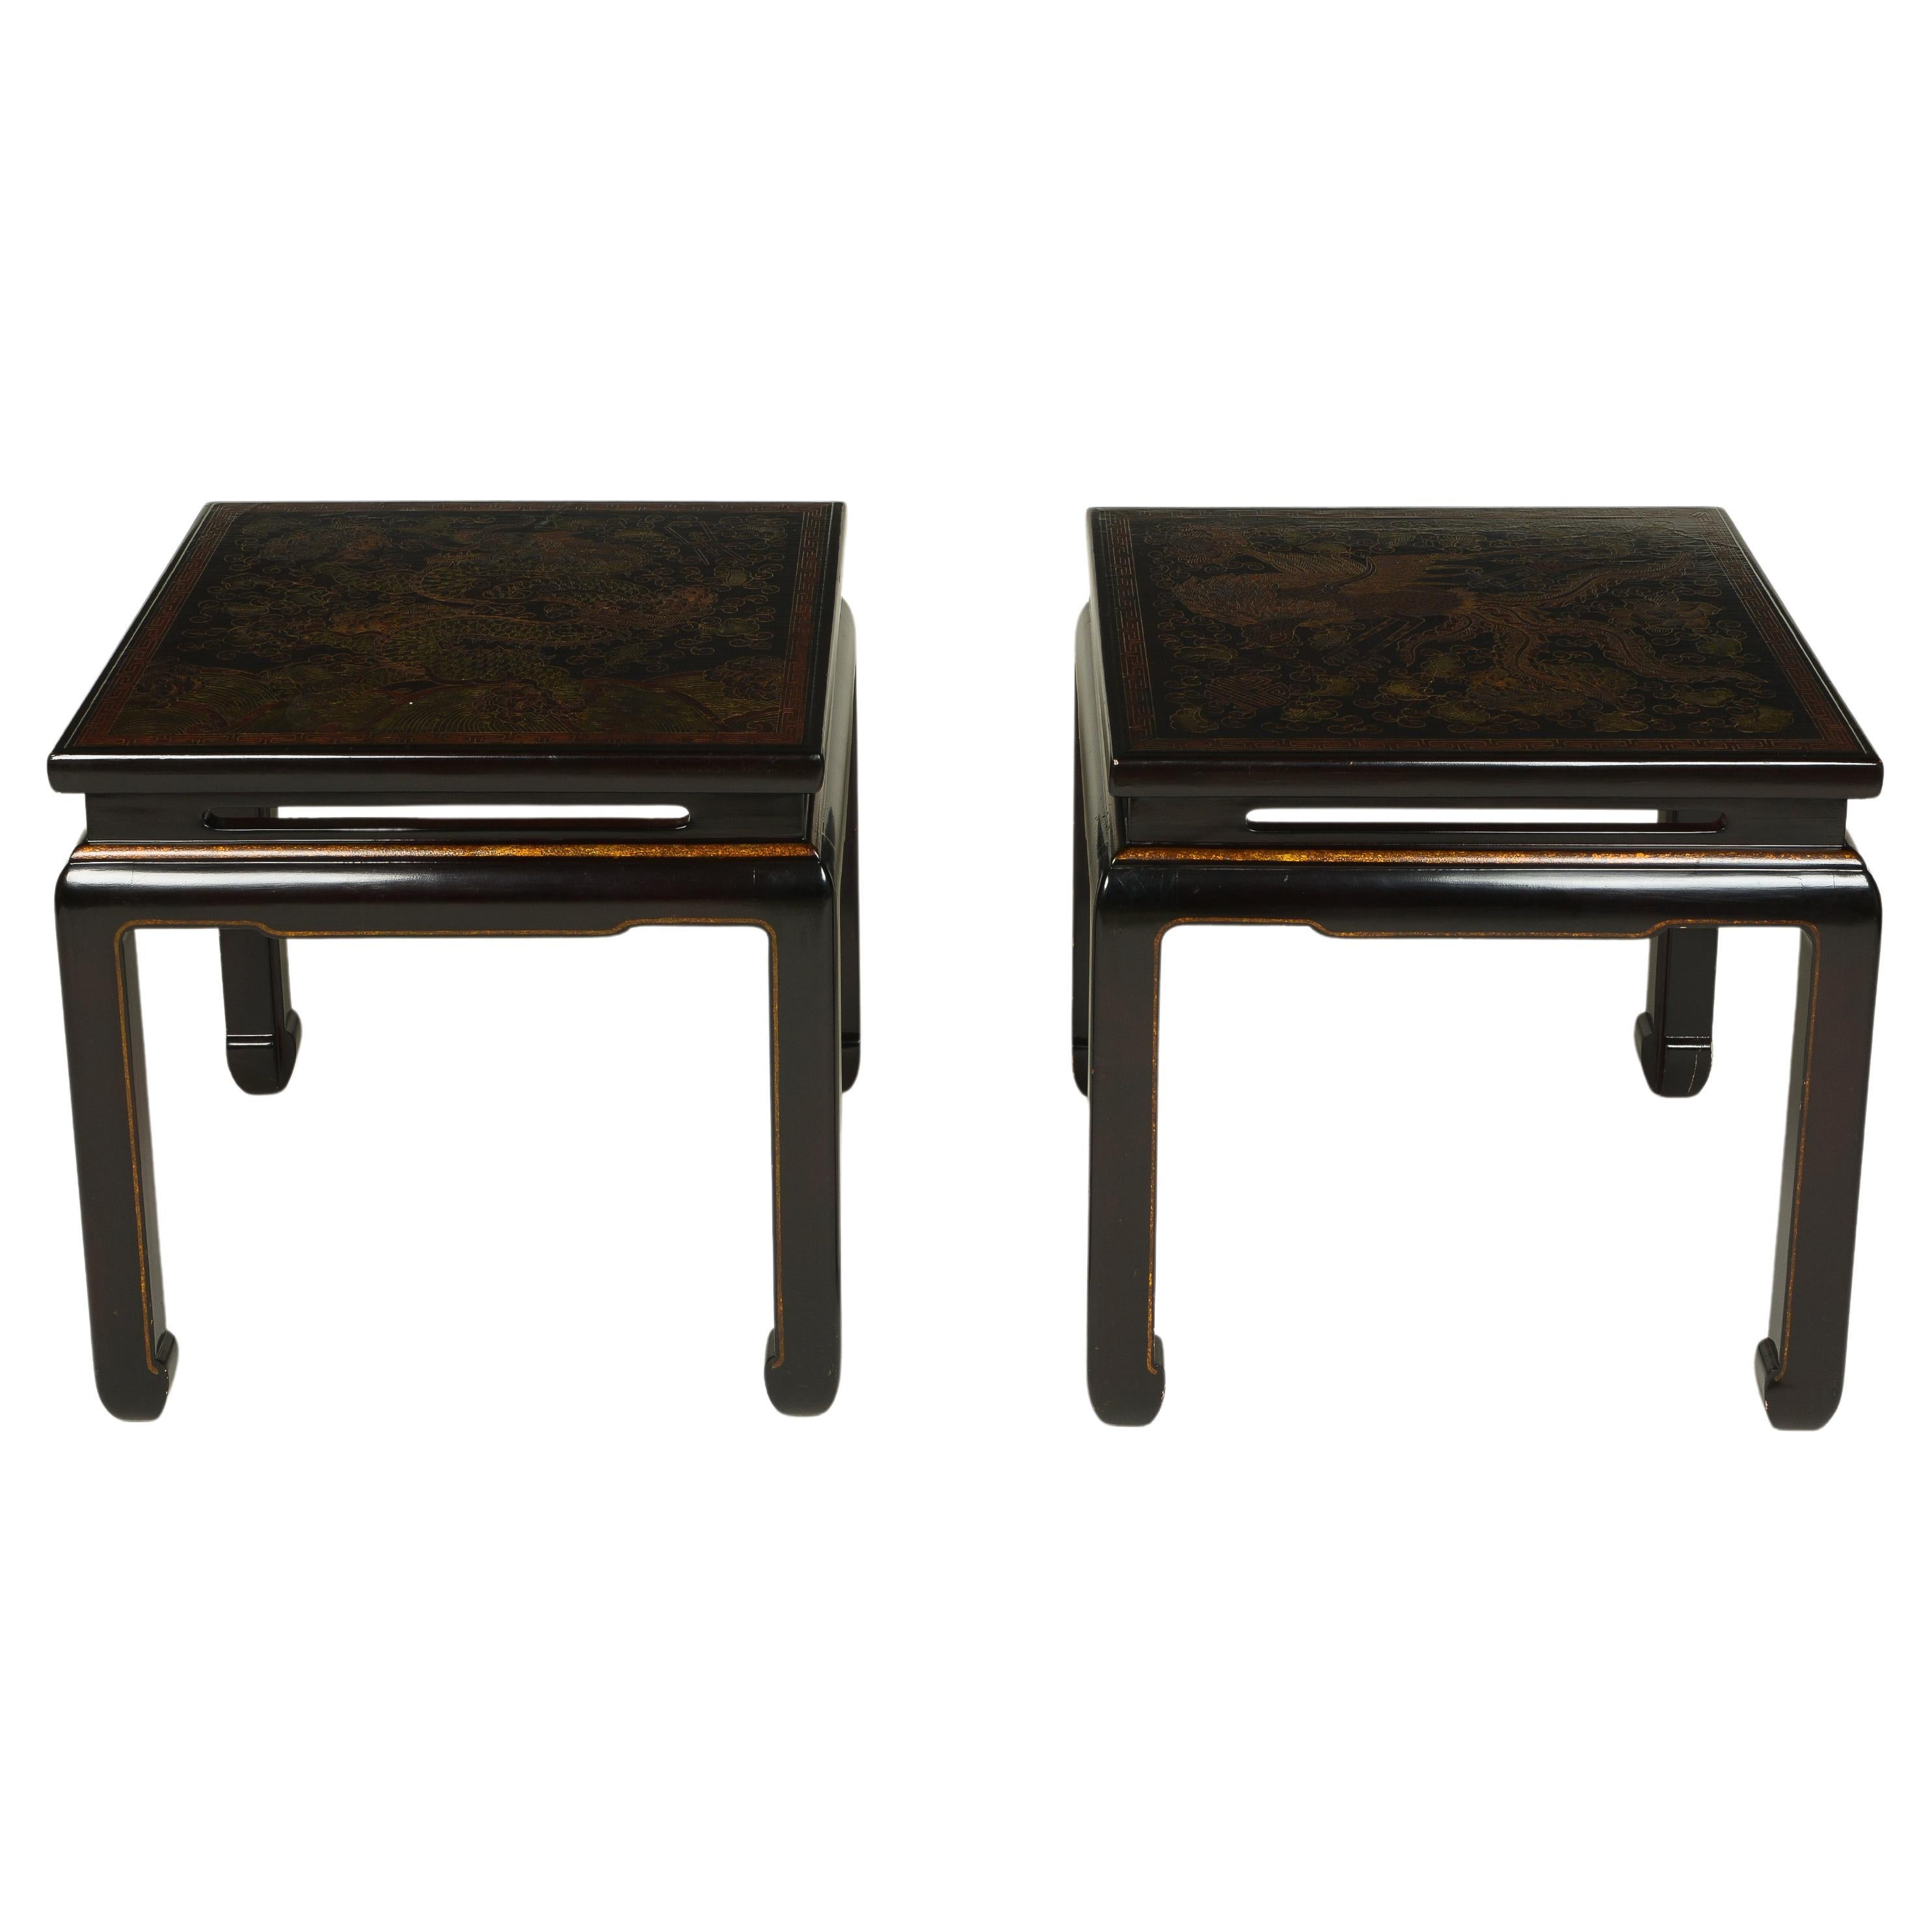 A Pair of Chinoiserie Dark Brown Coromandel Lacquer Square Low Tables